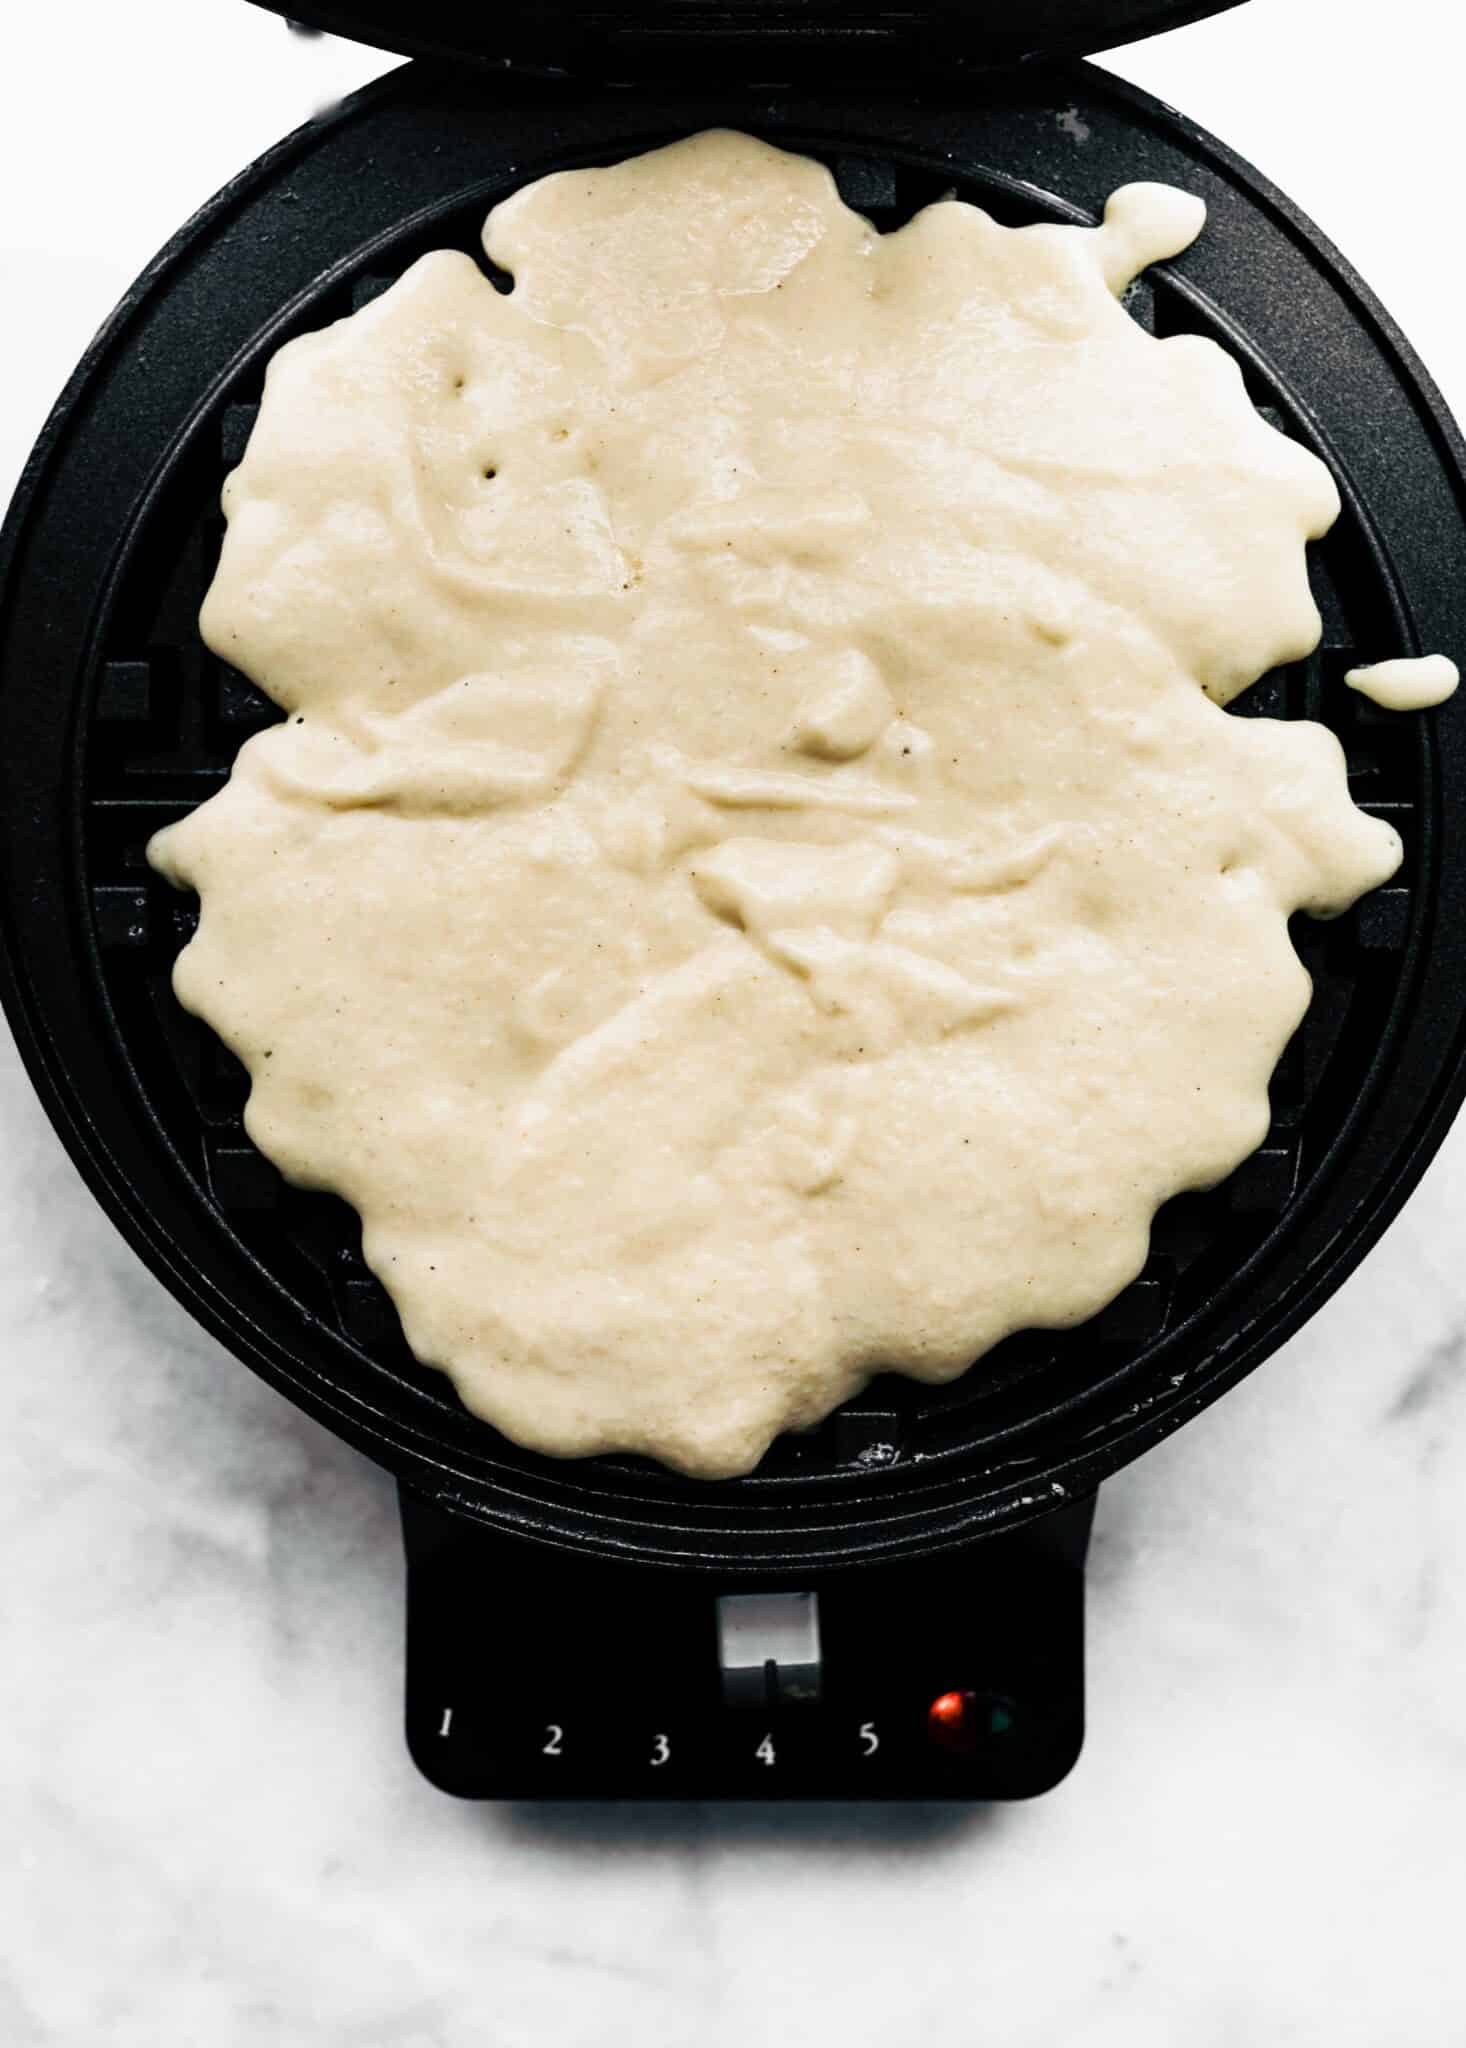 A waffle maker filled with raw gluten free waffle batter.